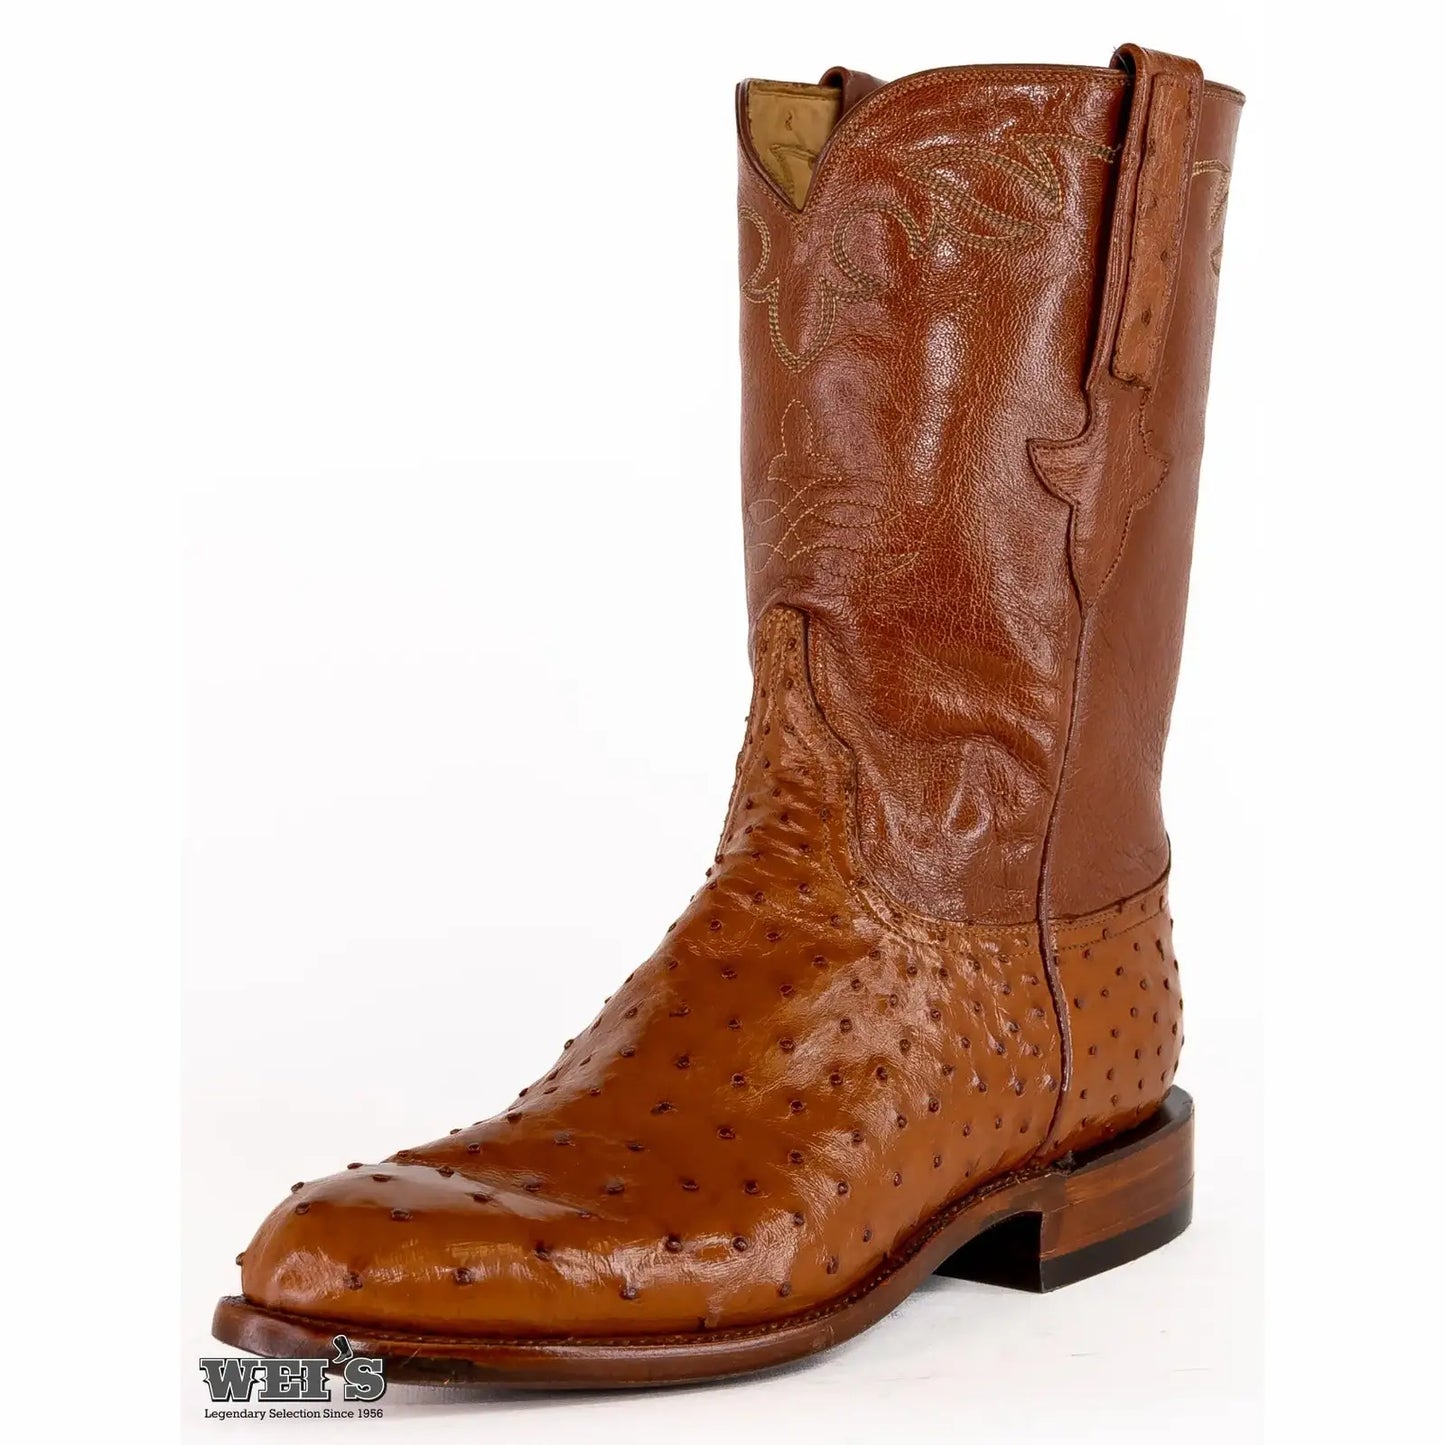 Lucchese Men's Cowboy Boots 12" Exotic Ostrich/Goat Roper Style E2025.RR